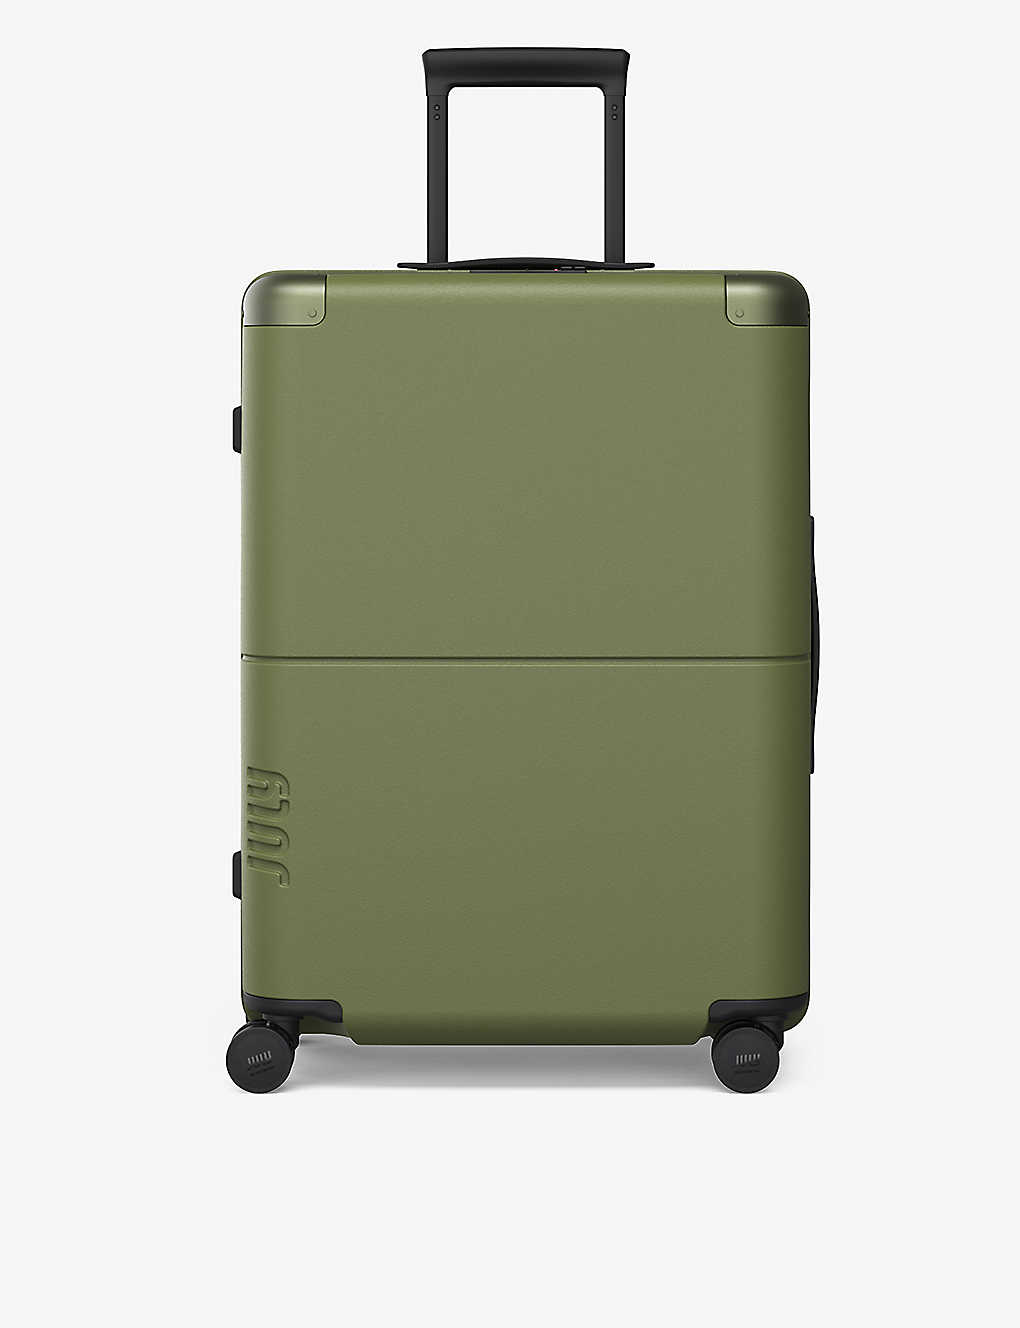 July Moss Checked Luggage Polycarbonate Suitcase 66cm